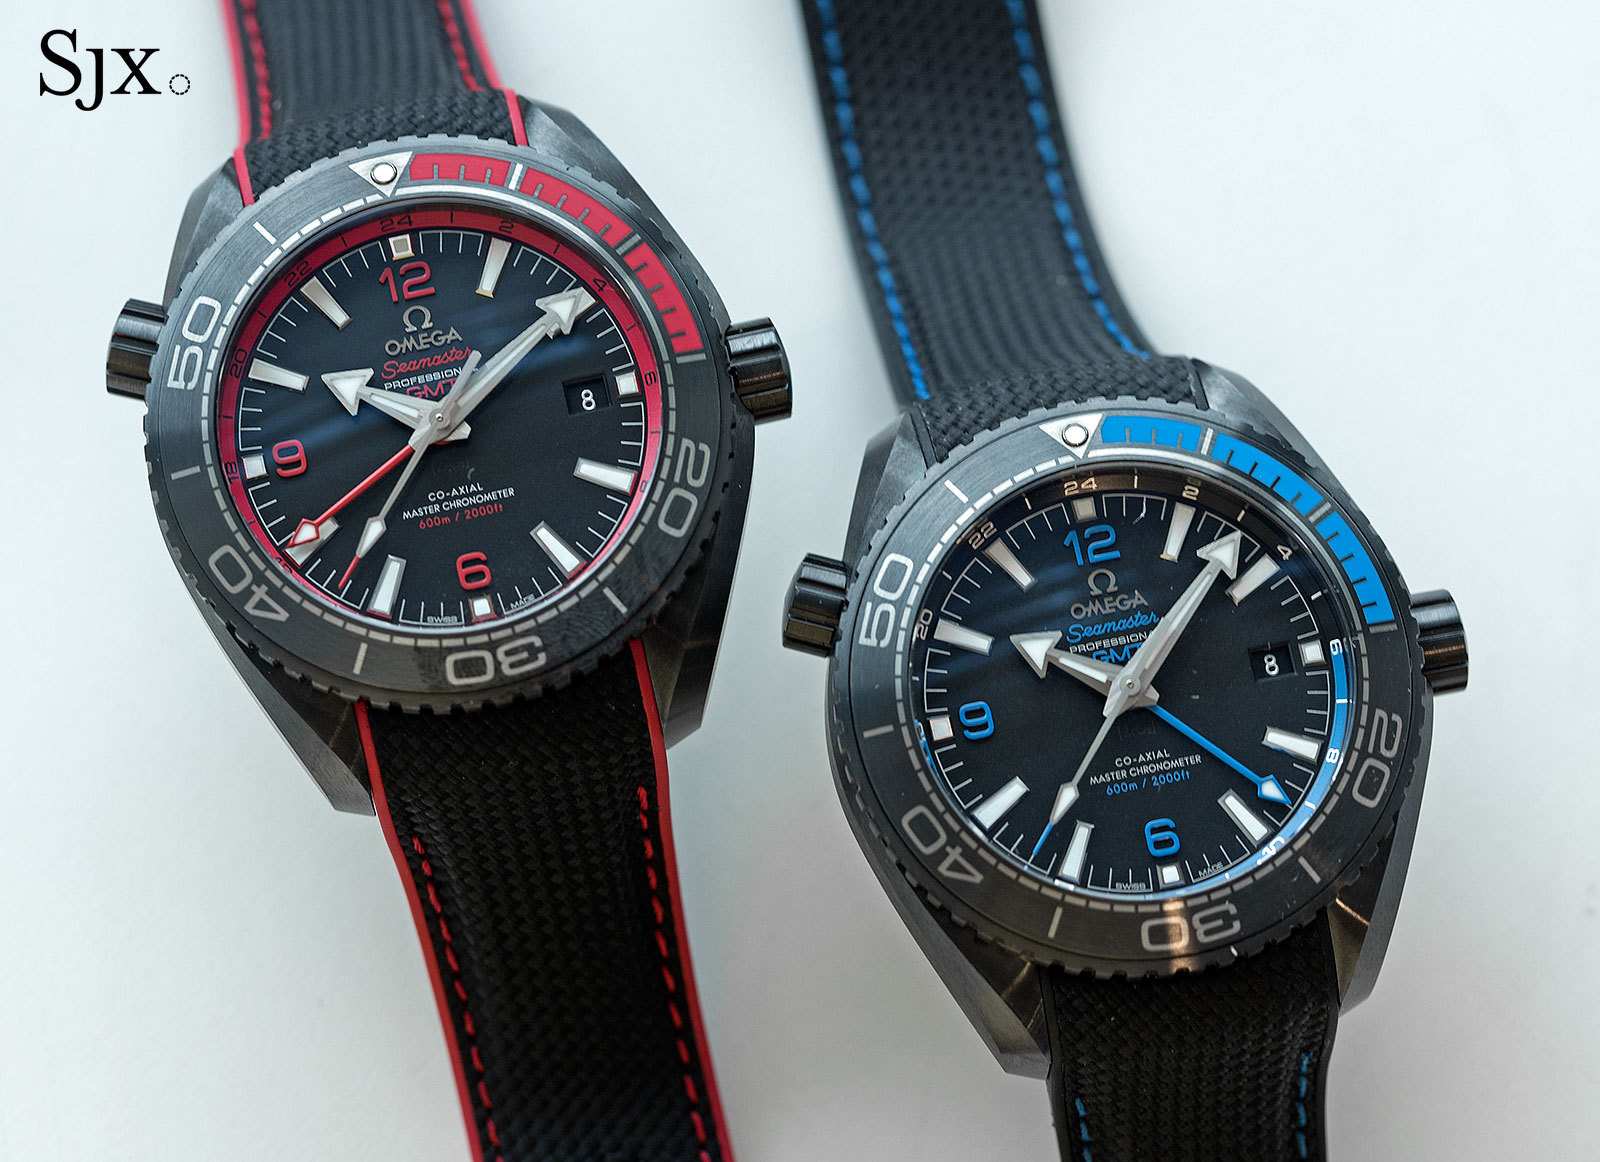 A Detailed Look at the Omega Seamaster Planet Ocean Deep Black GMT SJX ...